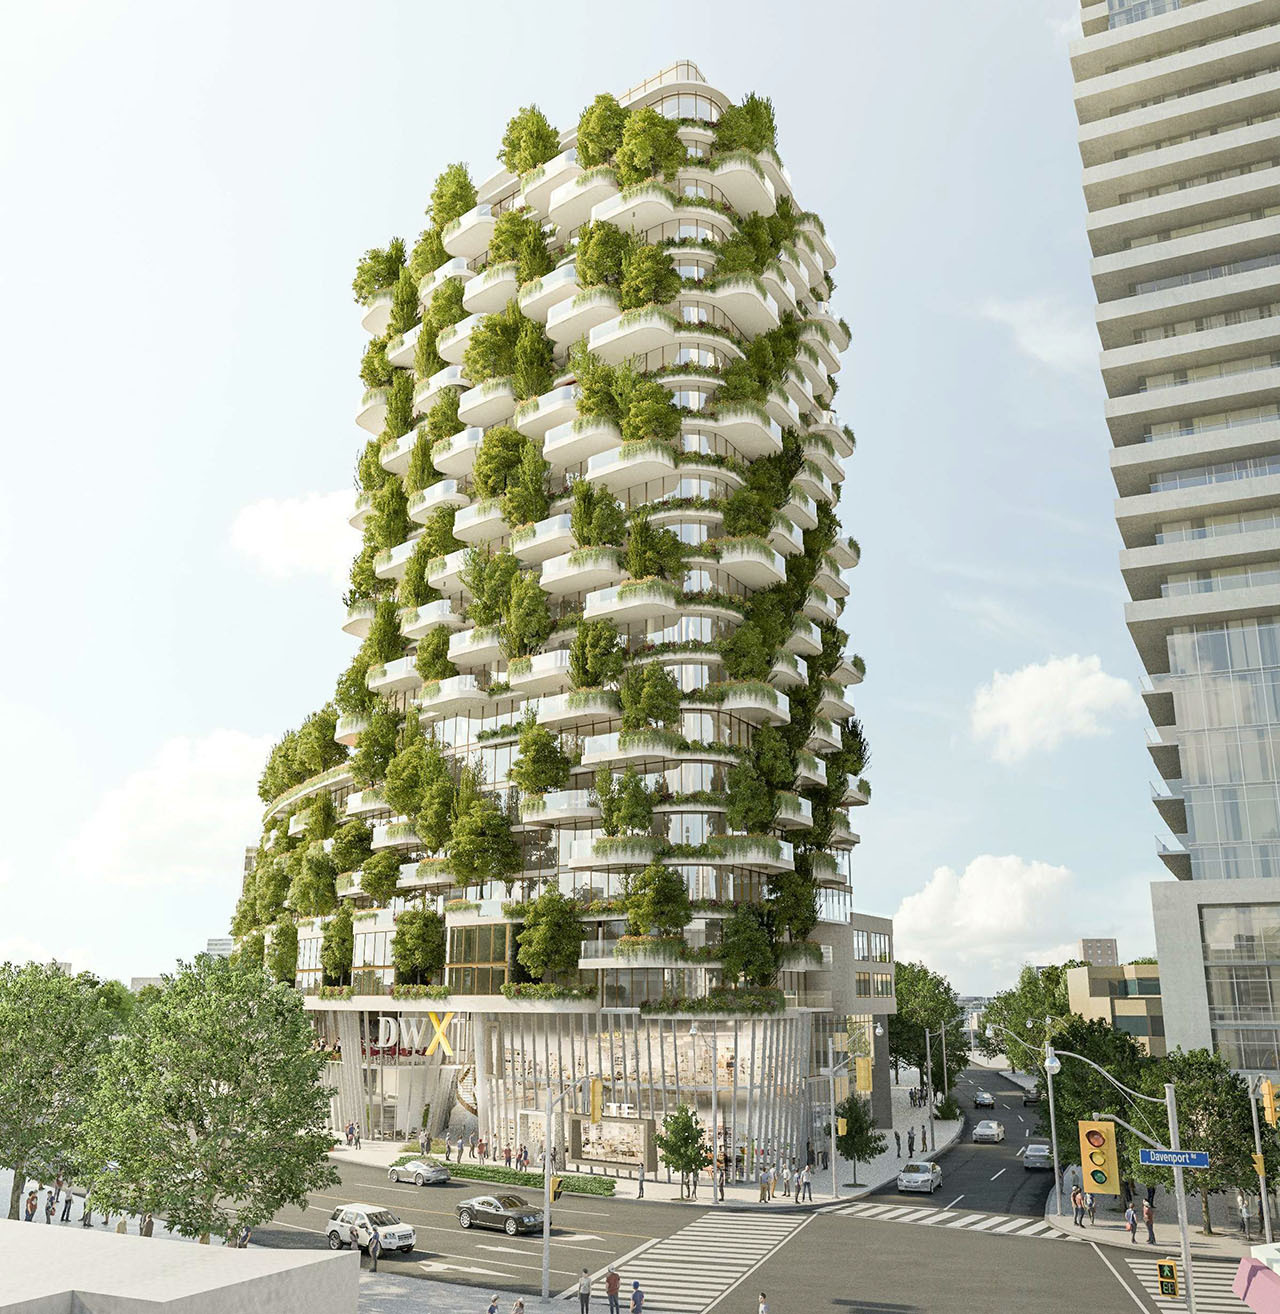 Designers Walk, Toronto, designed by BBB Architects for Cityzen Development Group and Greybrook Realty Partners.